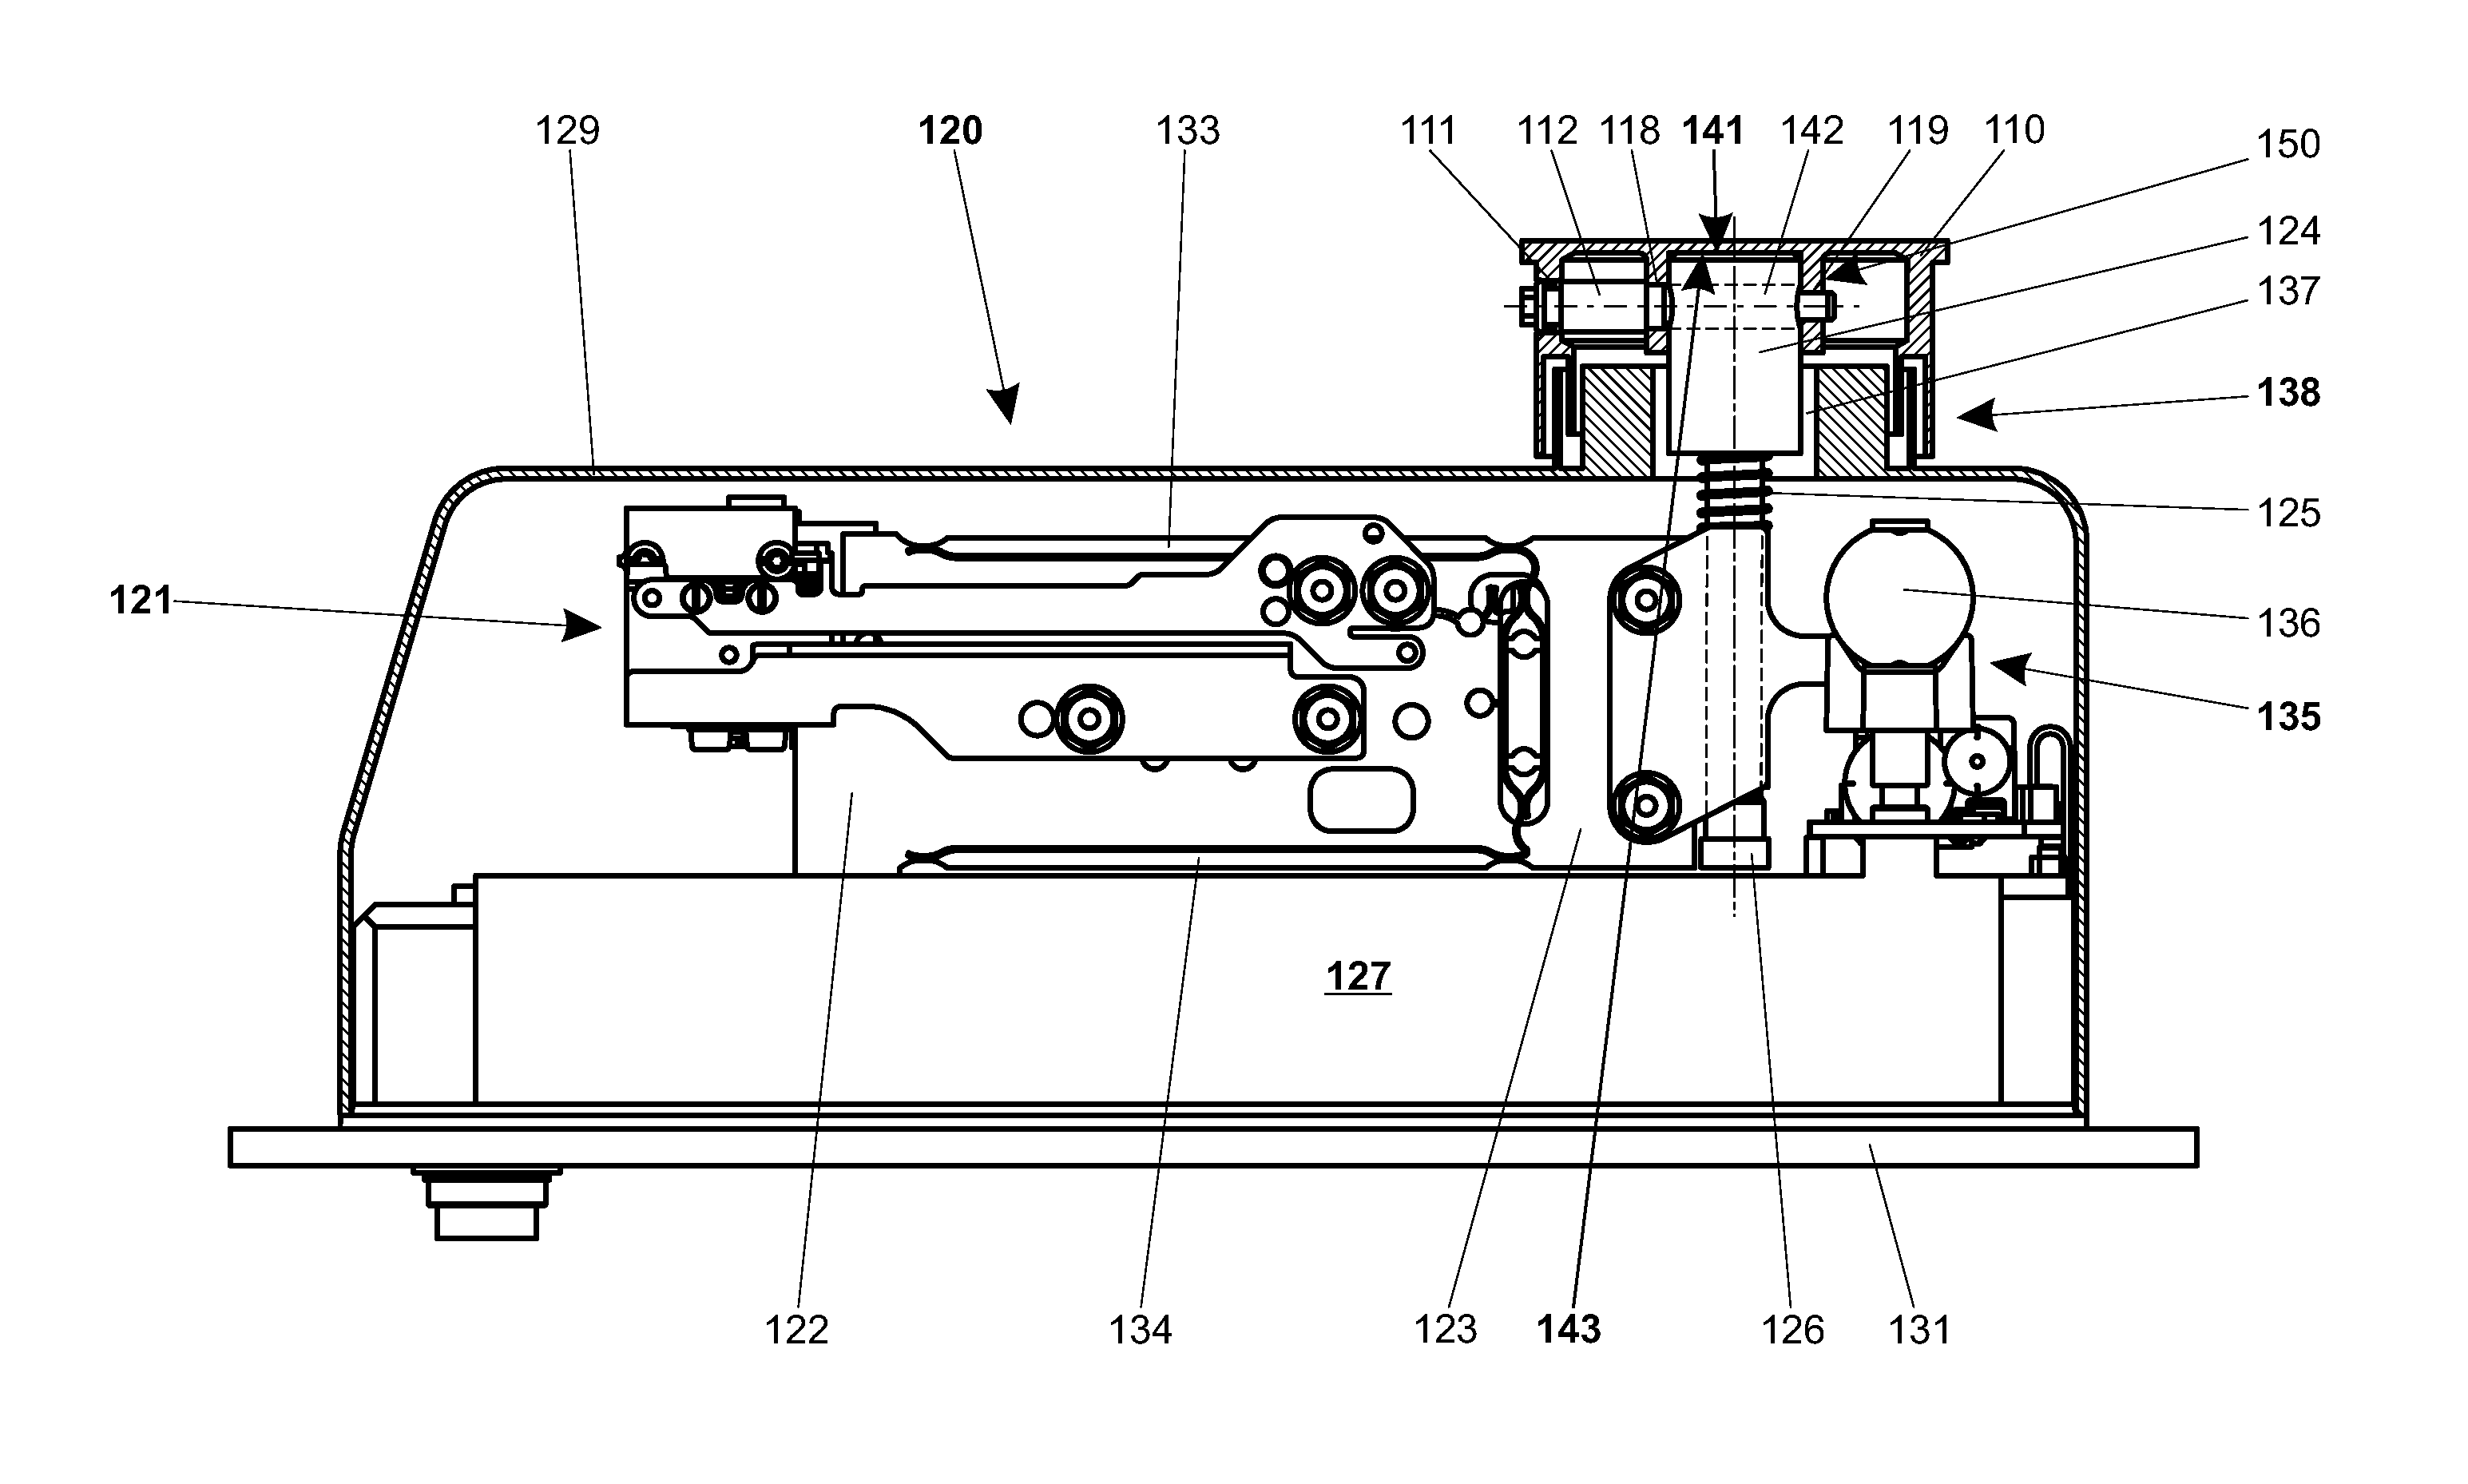 Gravimetric measuring instrument with releasable load receiver